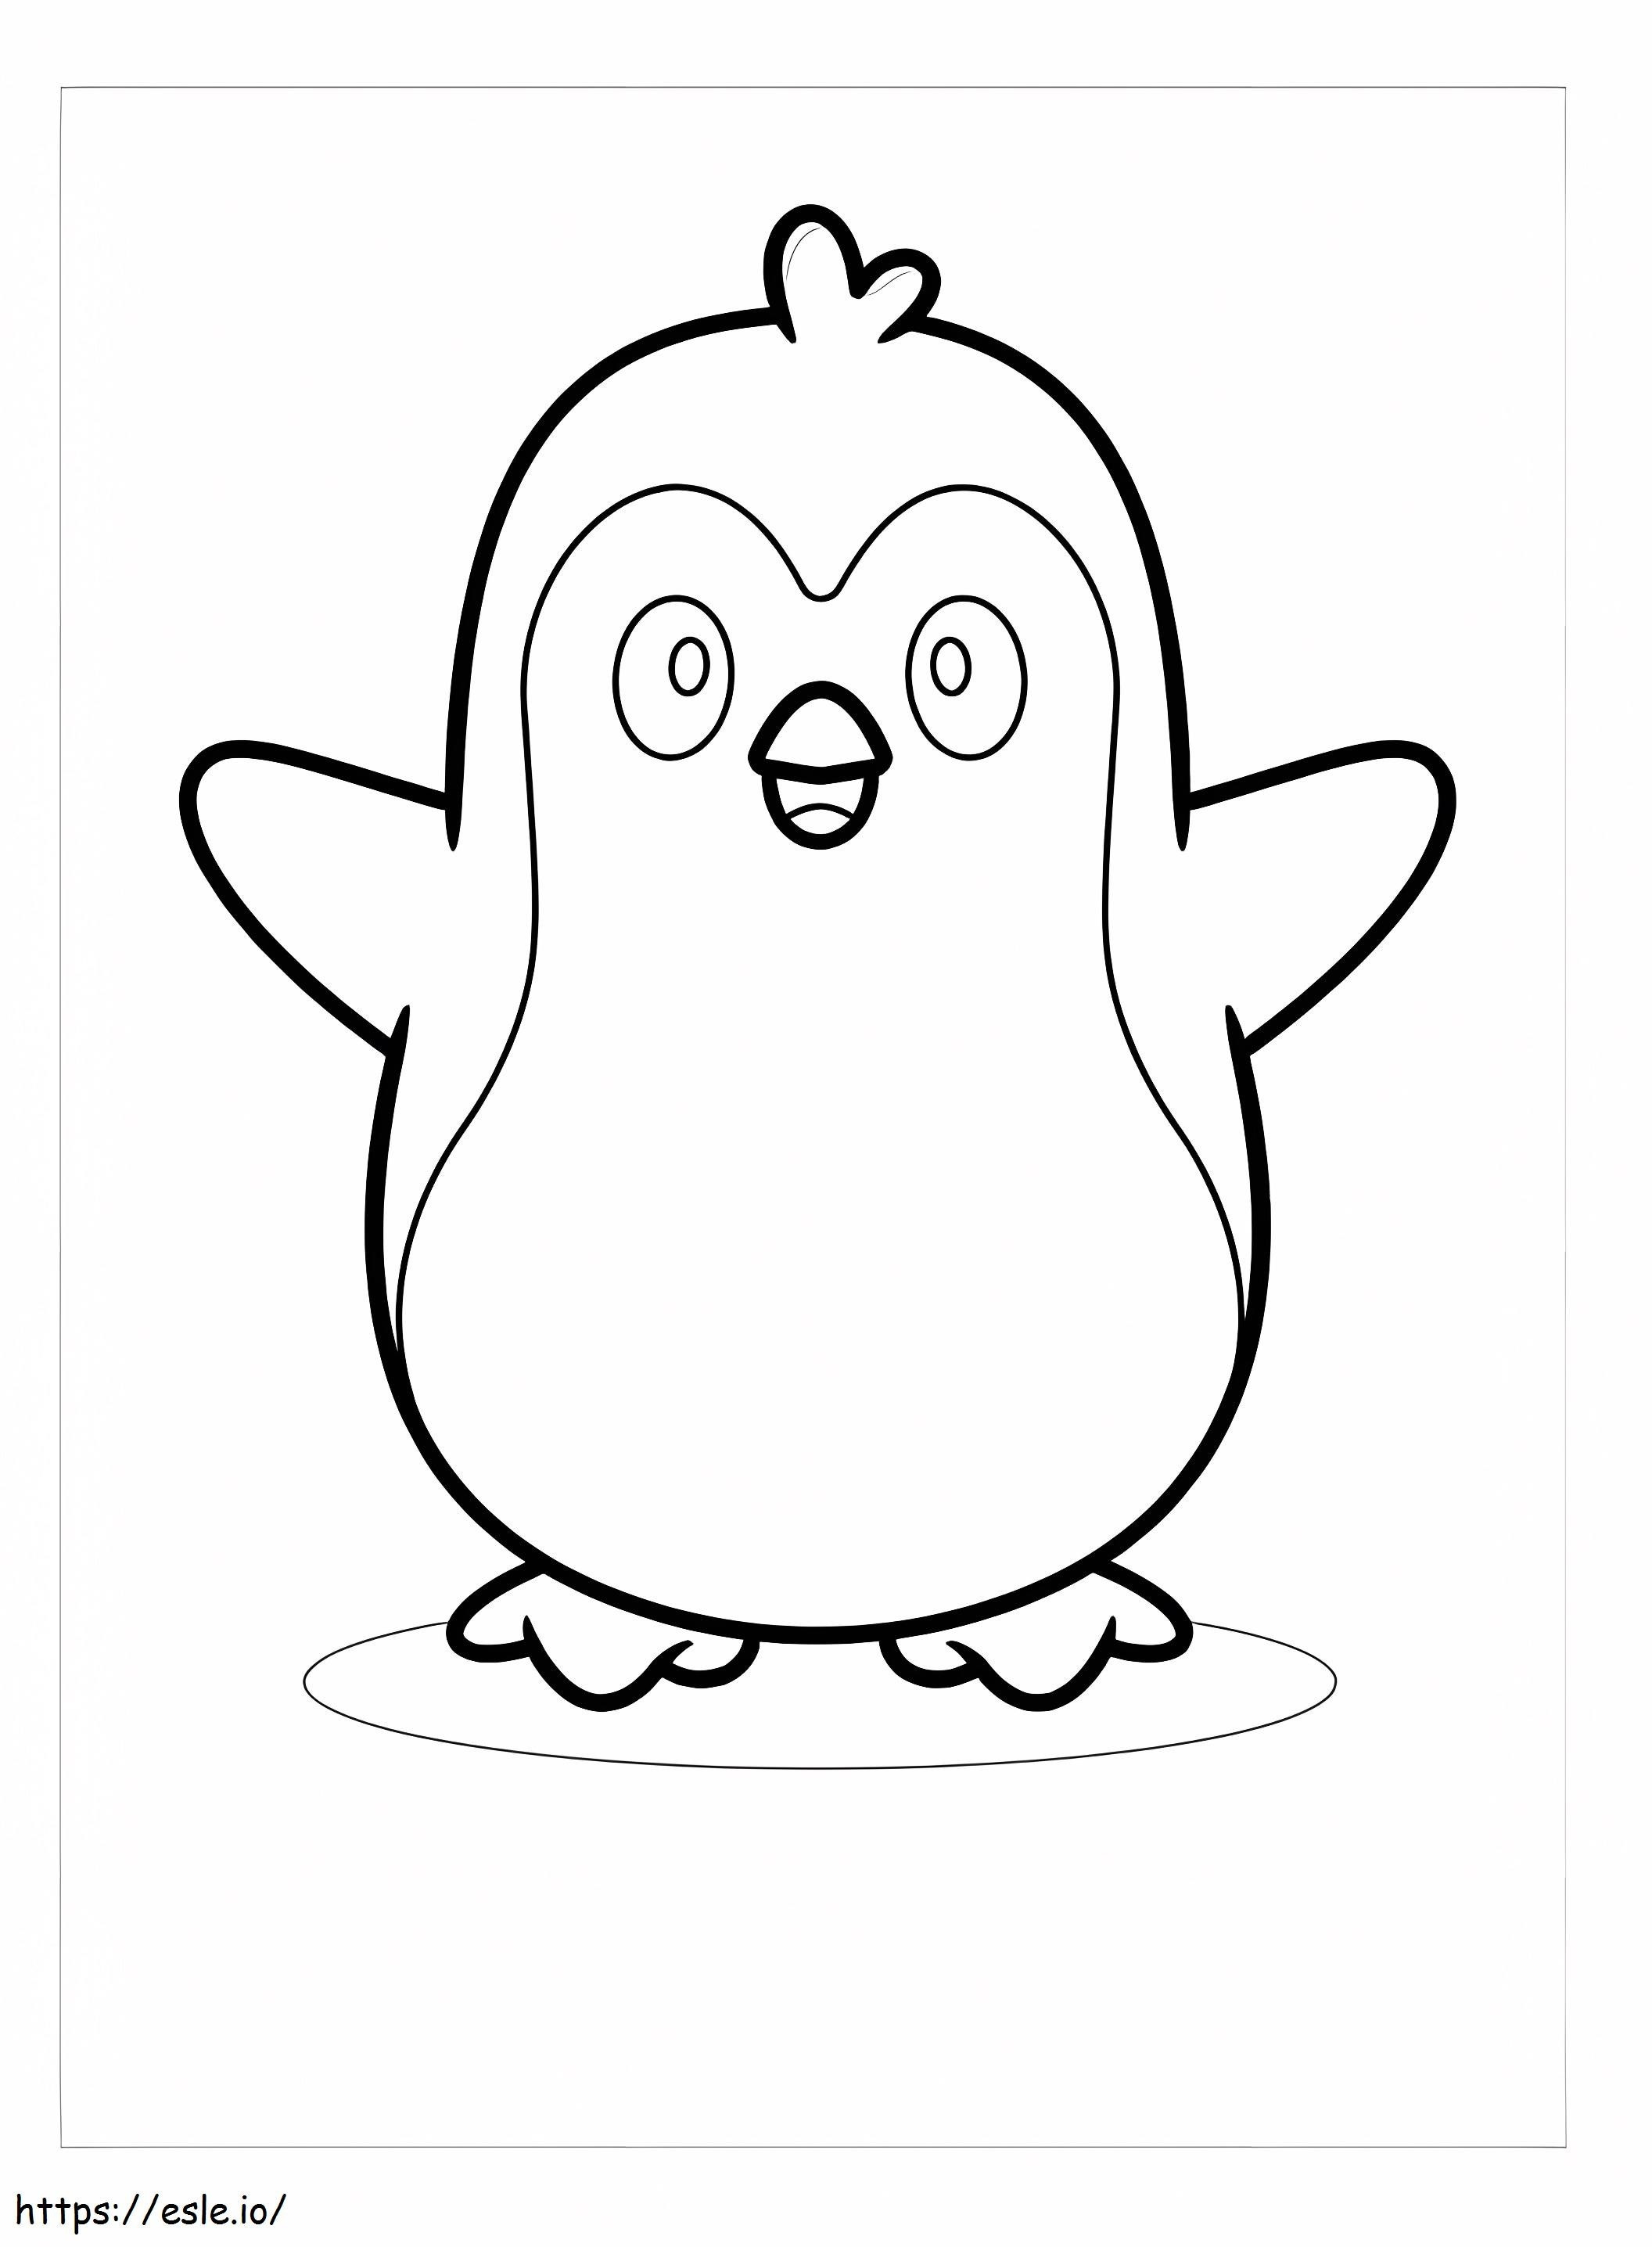 Galapagos Penguin coloring page